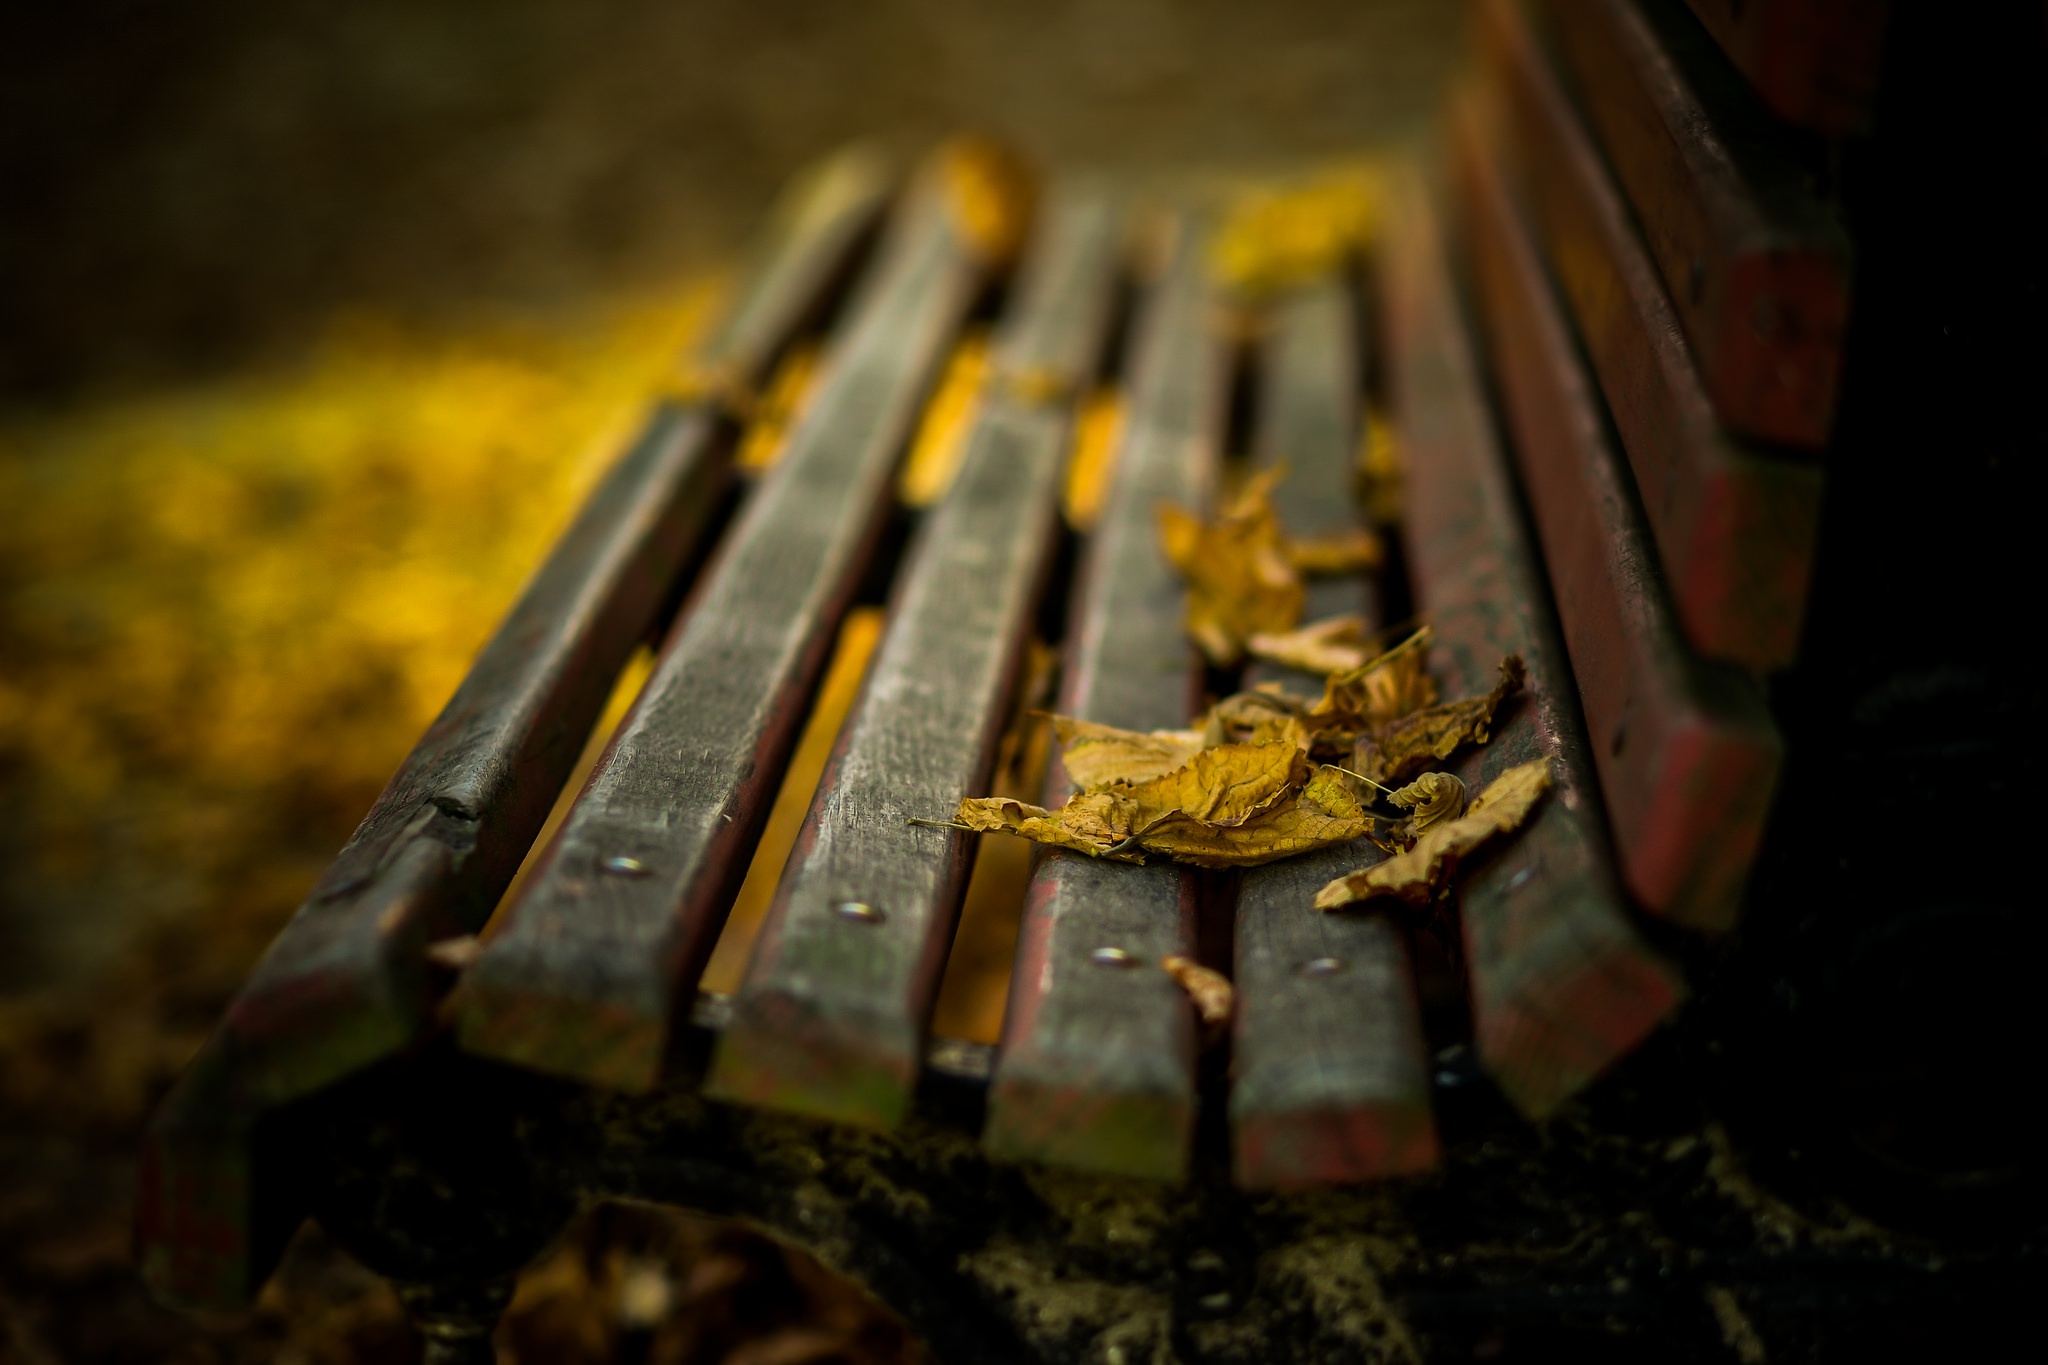 General 2048x1365 bench fall leaves depth of field